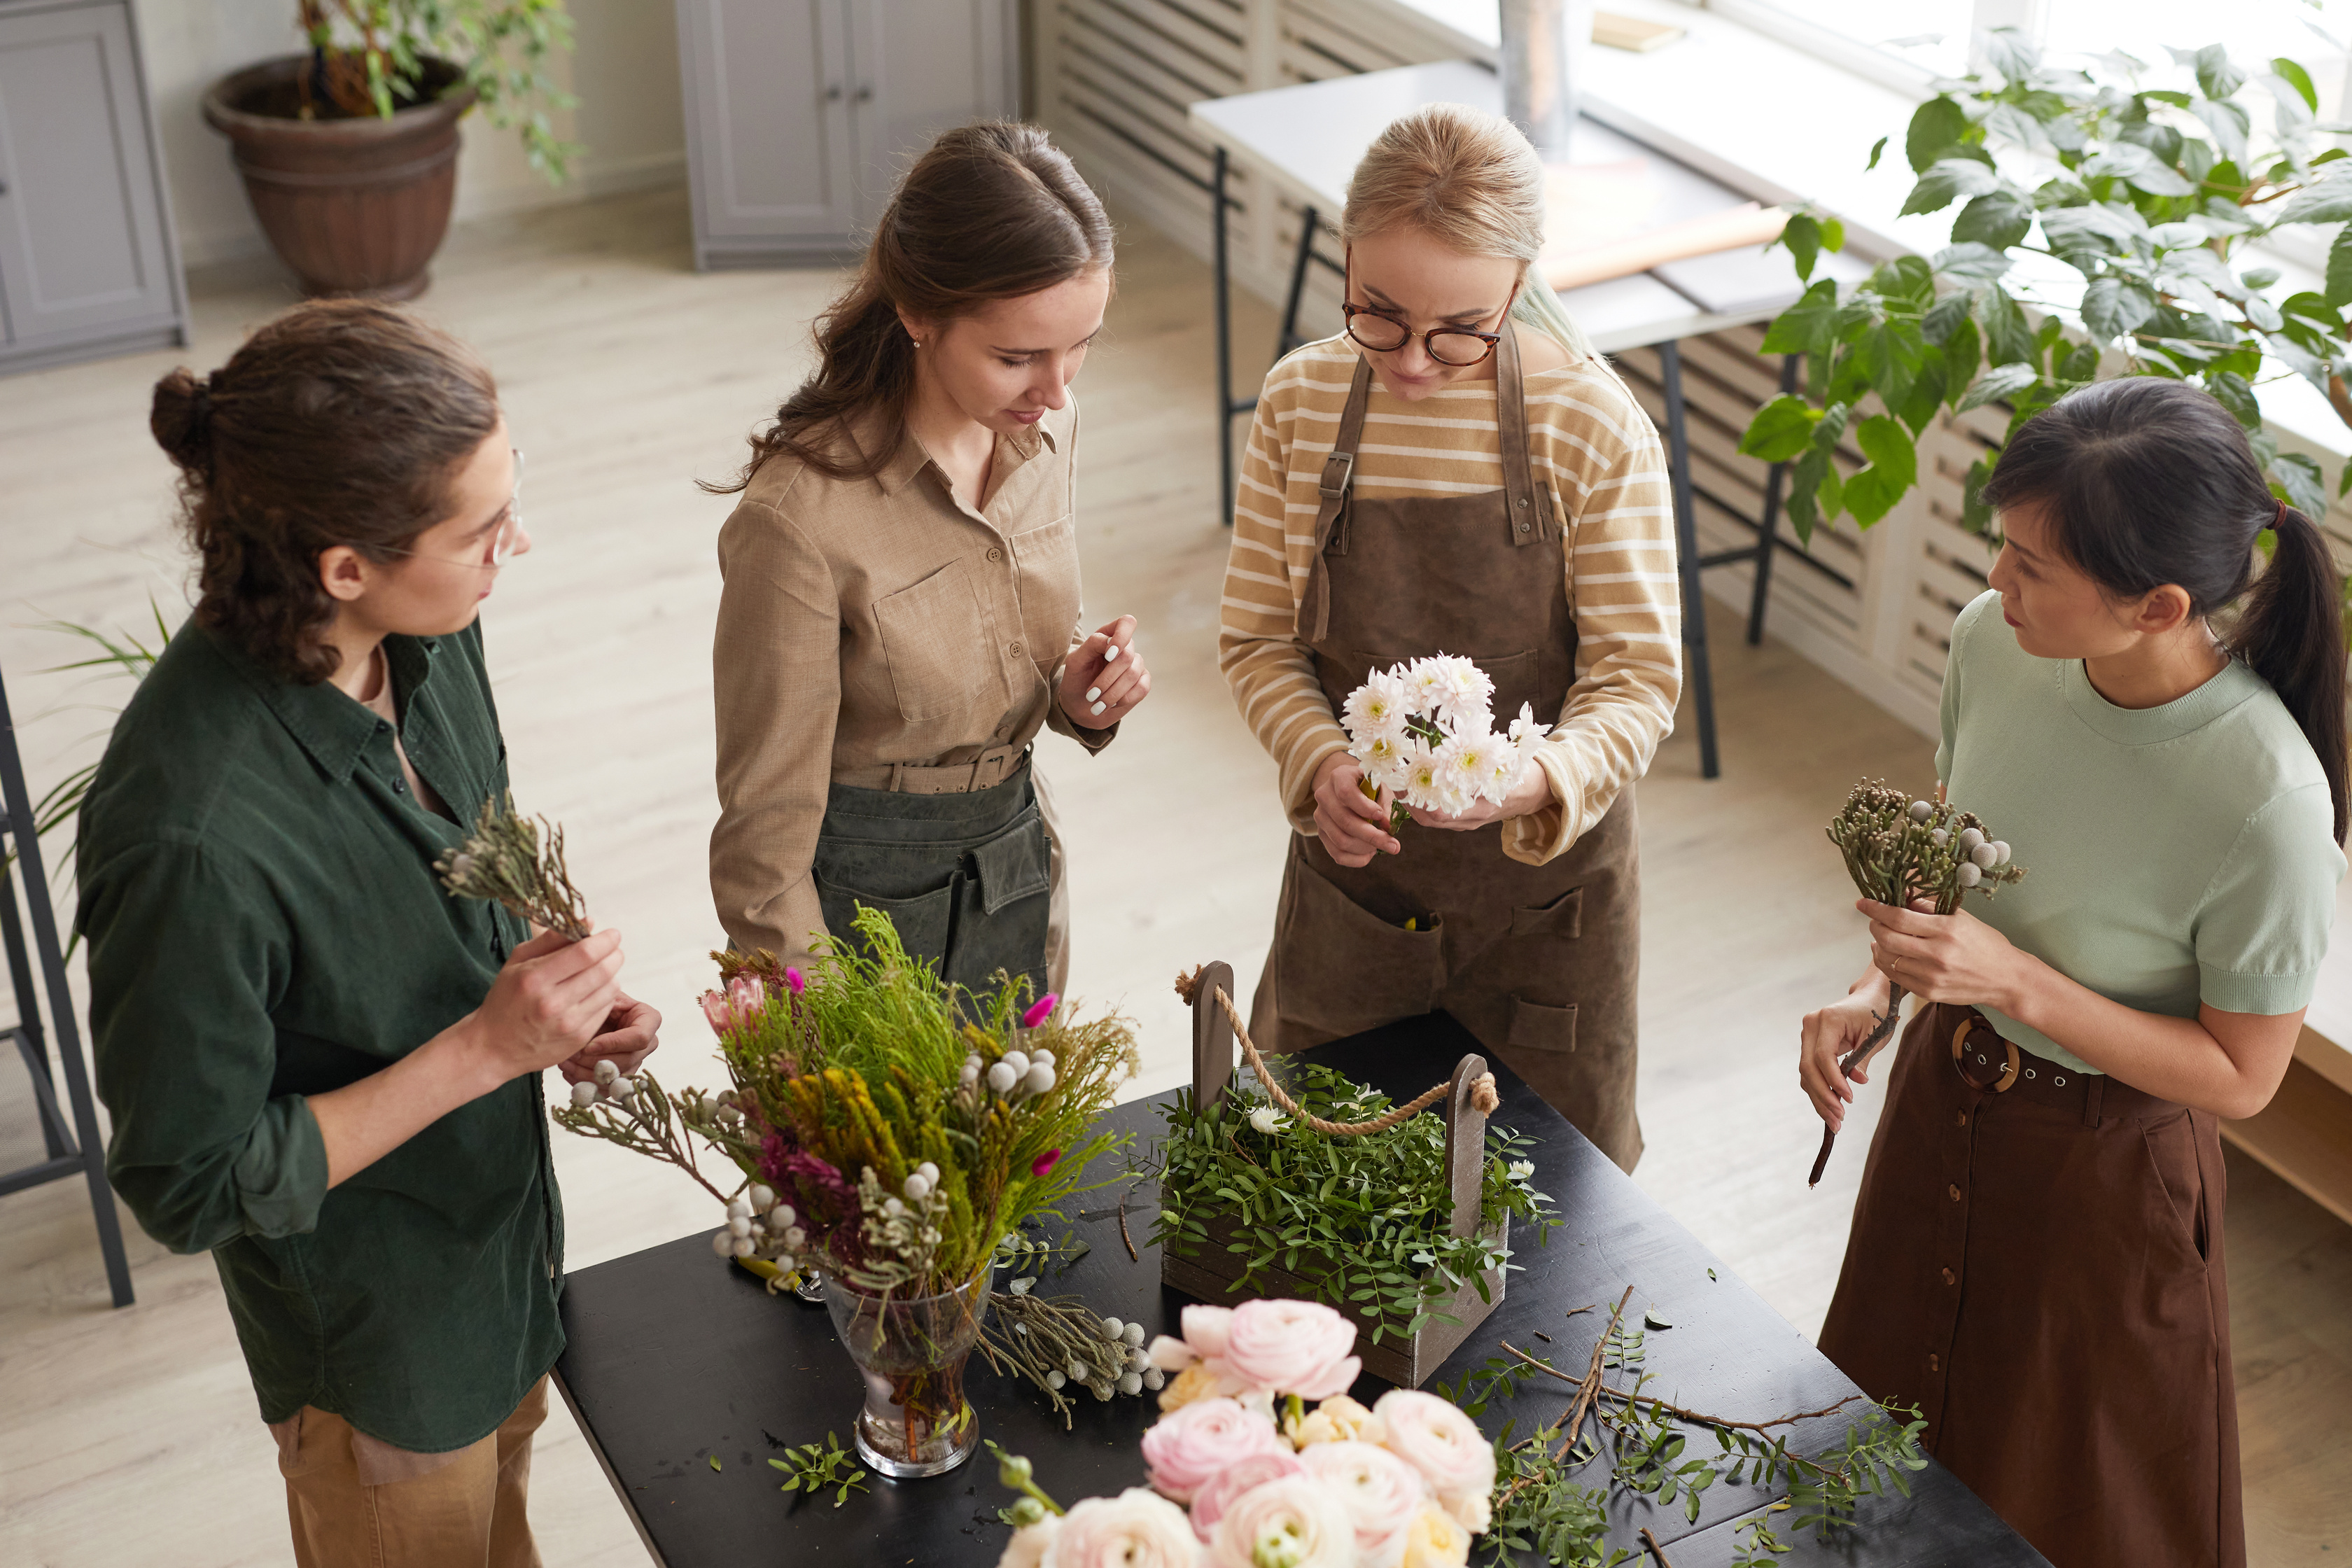 Group of People in Workshop on Floral Art